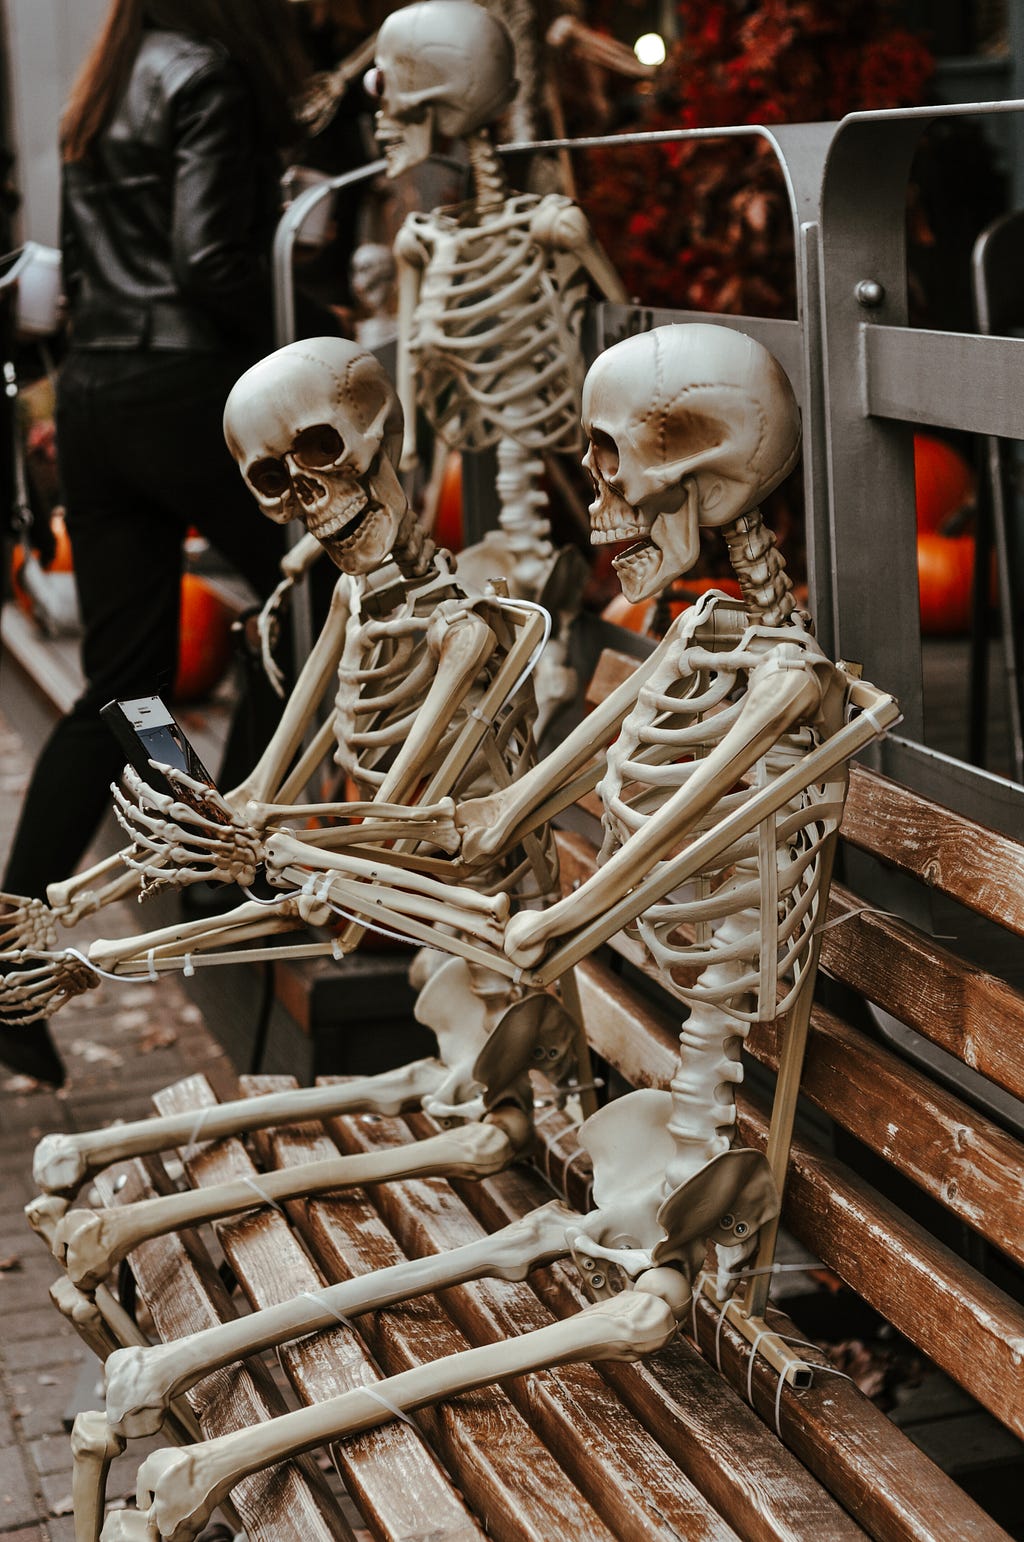 2 skeletons sit on a city bench, one is holding a smart phone